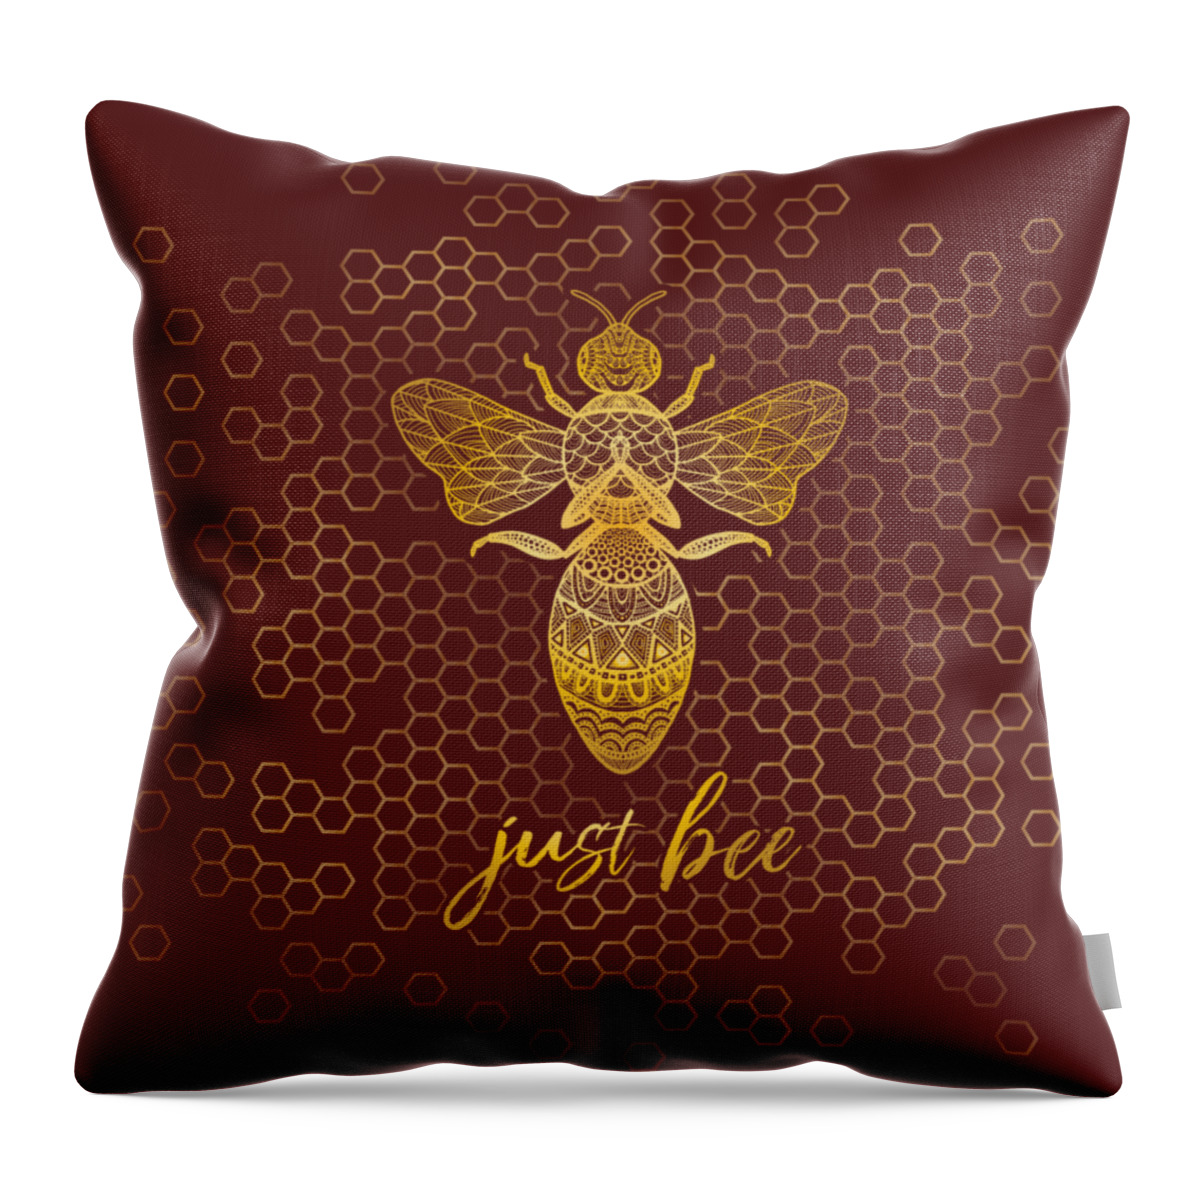 Just Bee Throw Pillow featuring the digital art Just Bee - Geometric Zen Bee Meditating over Honeycomb Hive by Laura Ostrowski